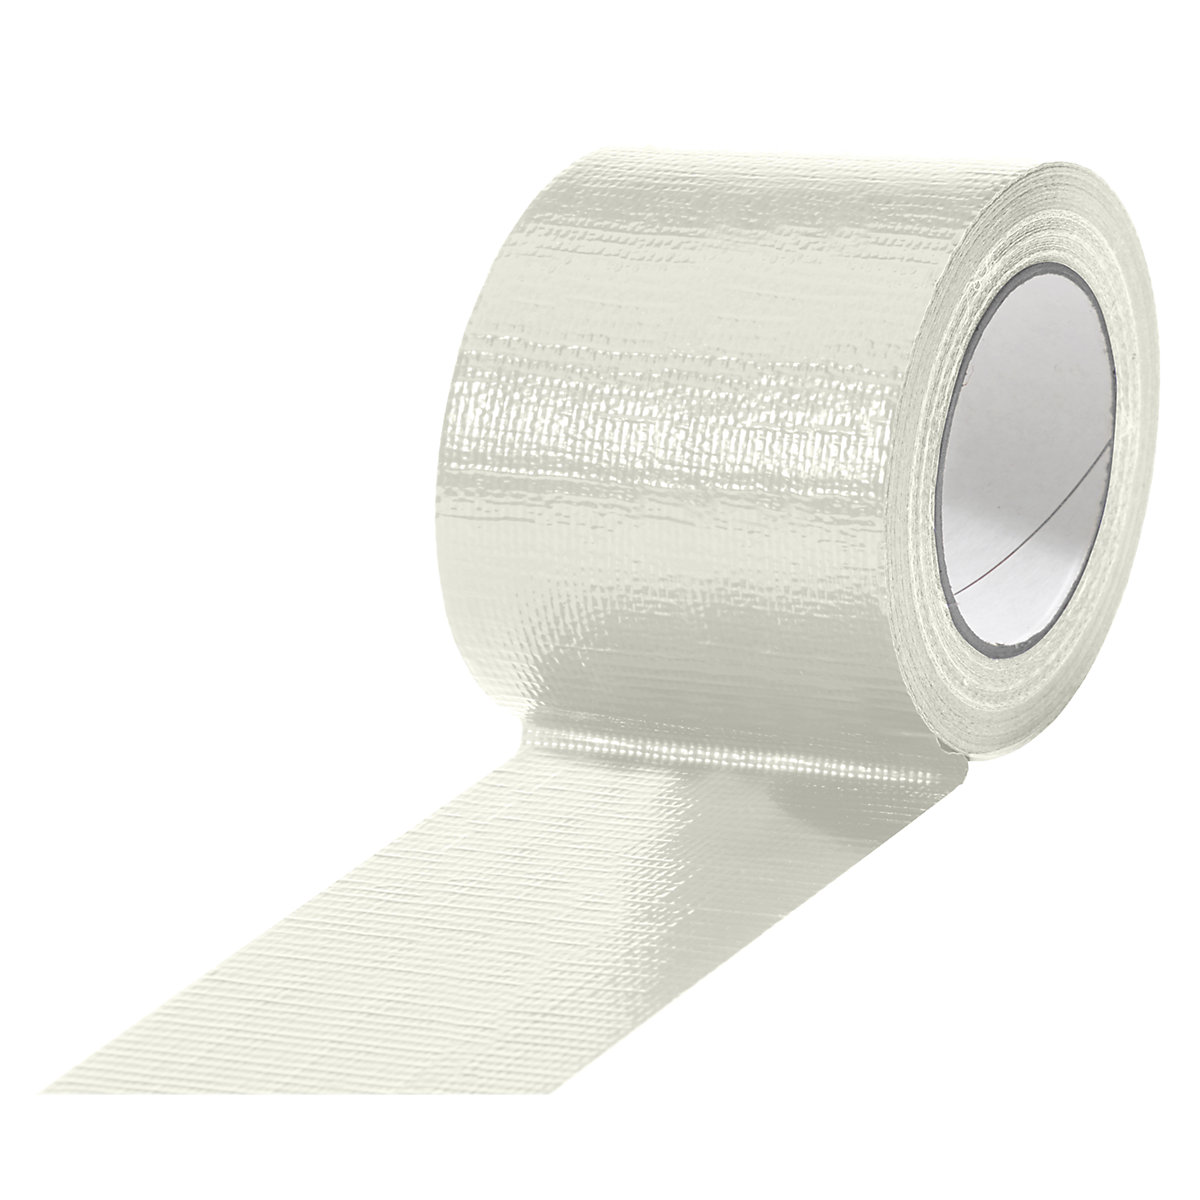 Fabric tape, in different colours, pack of 12 rolls, white, tape width 75 mm-8